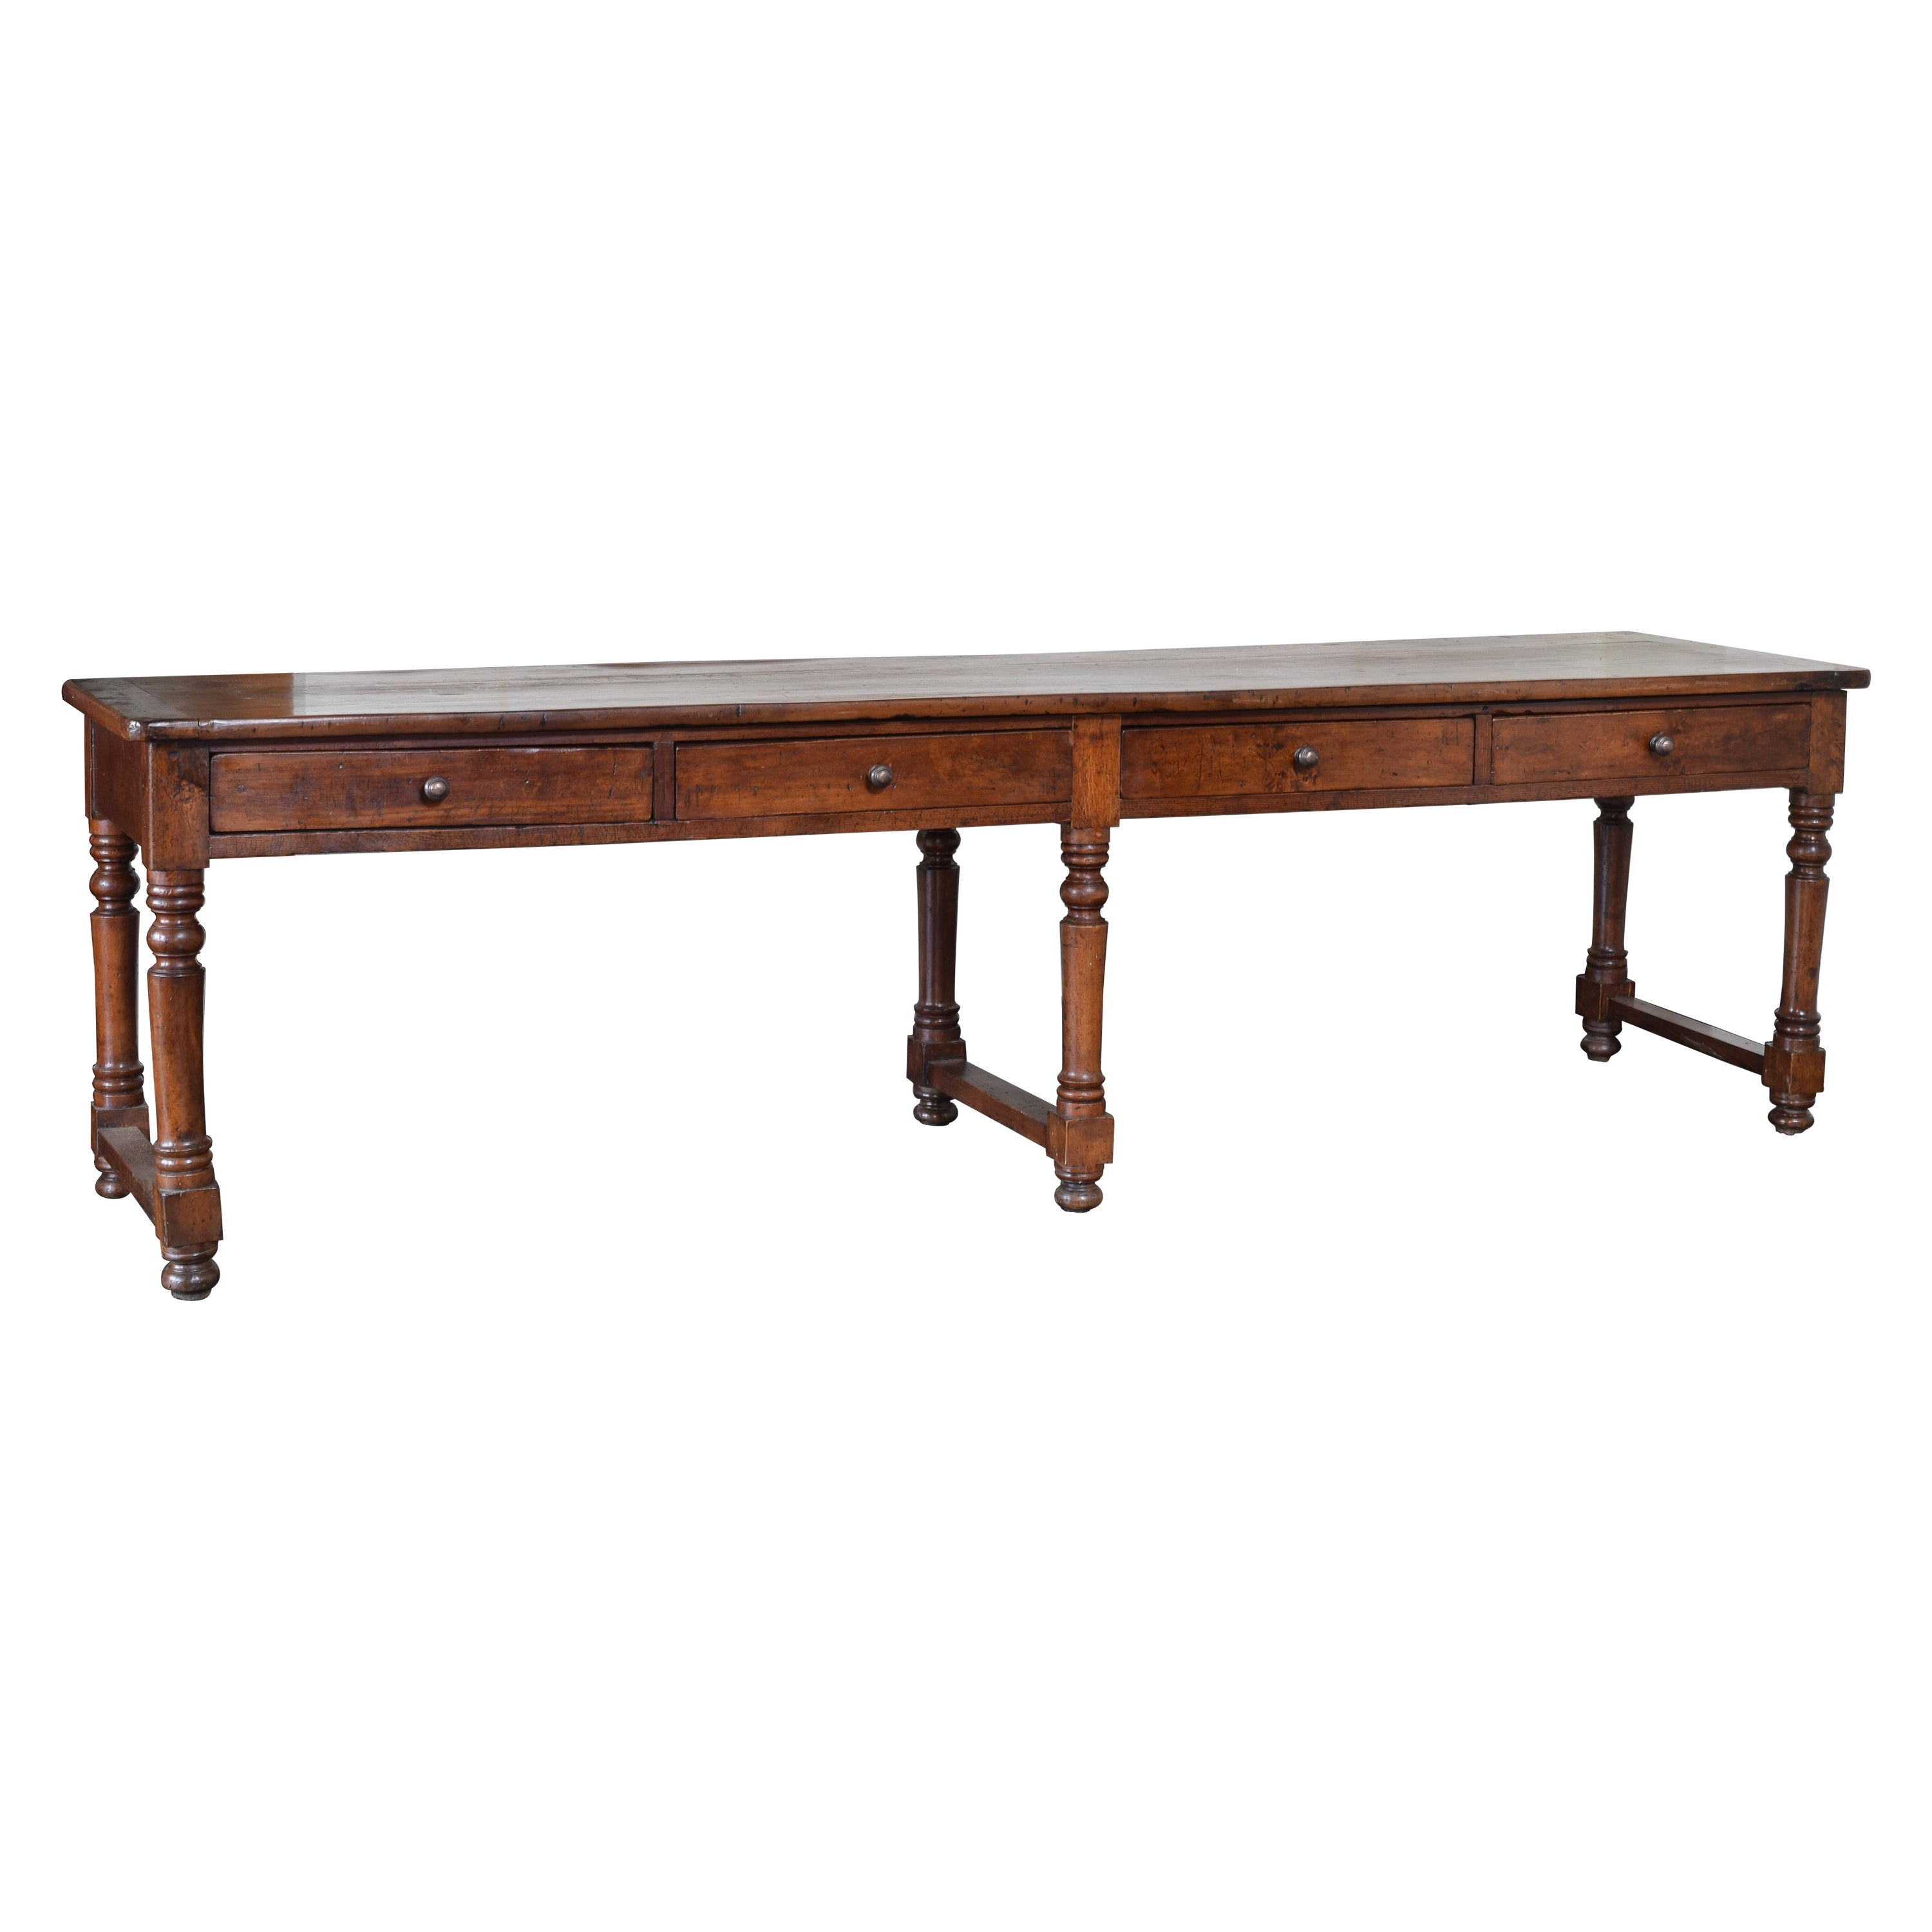 Italian LXIII Style Turned Walnut 4-Drawer Center/Console Table, mid 19th cen.